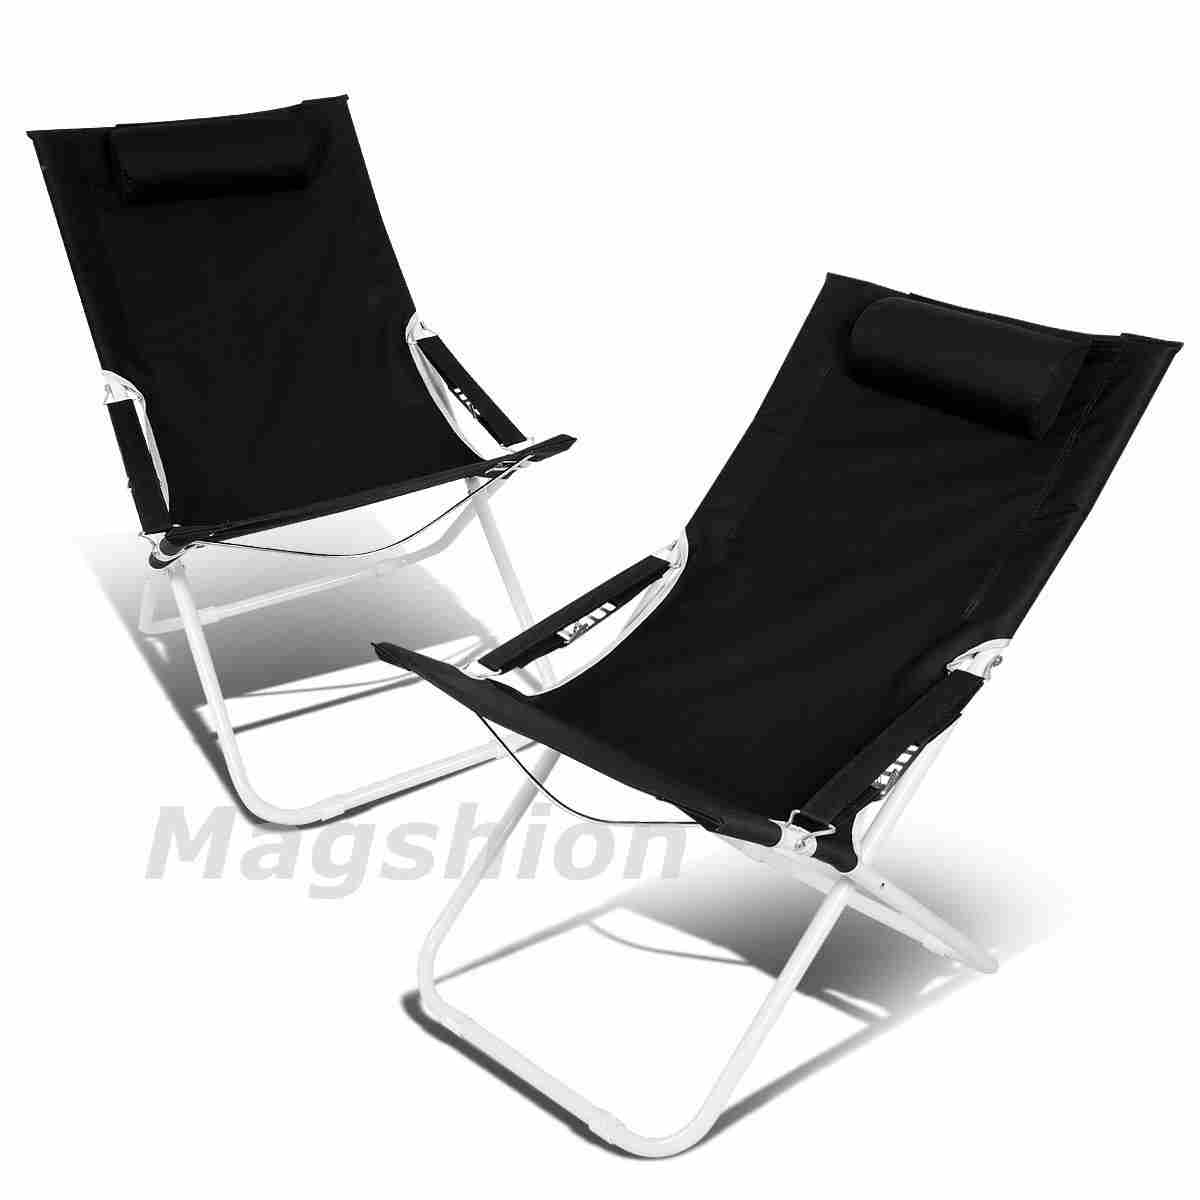 magshion-high-quality-camping-chairs